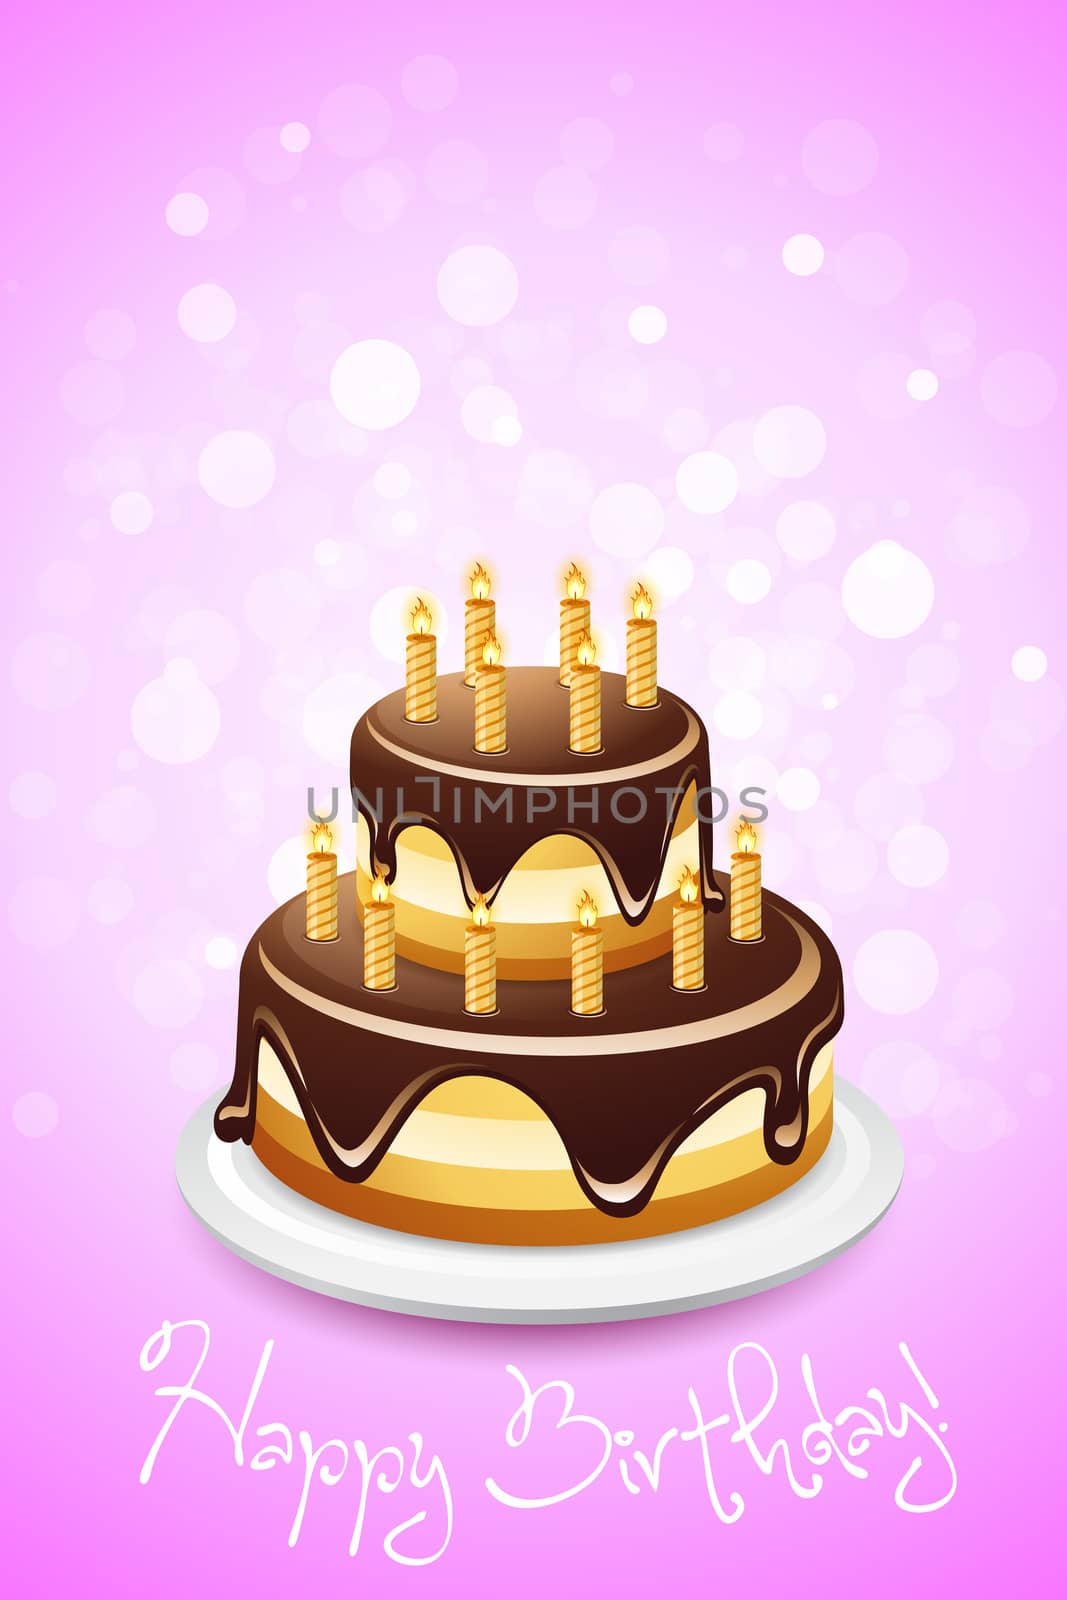 Happy Birthday Card with Cake and Candles